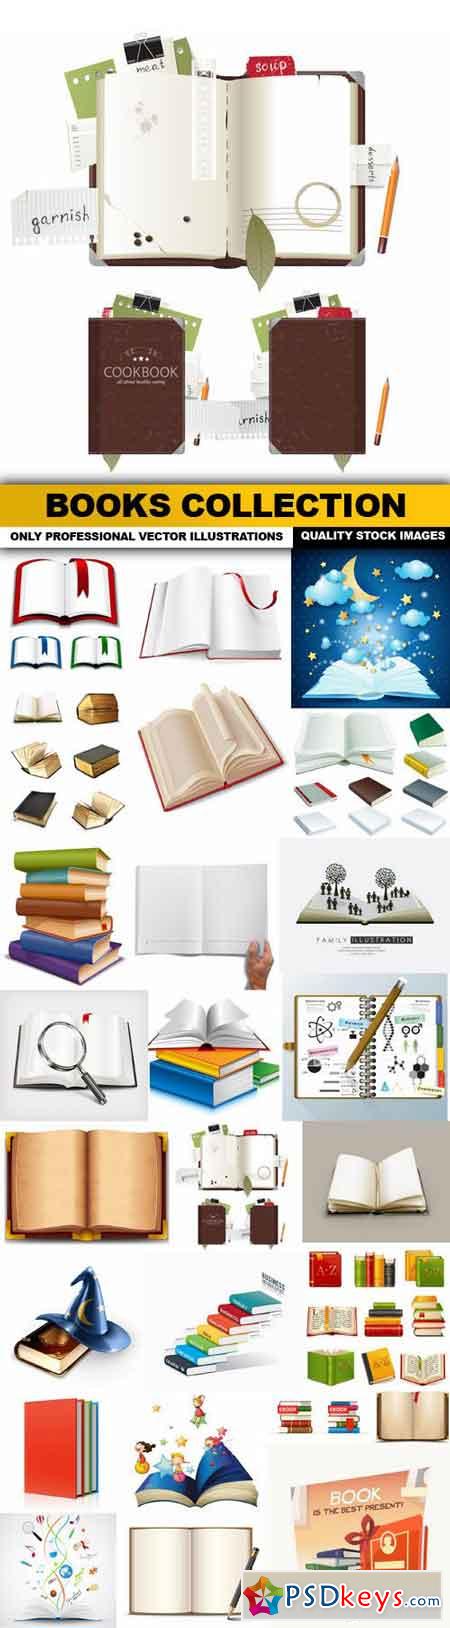 Books Collection - 25 Vector